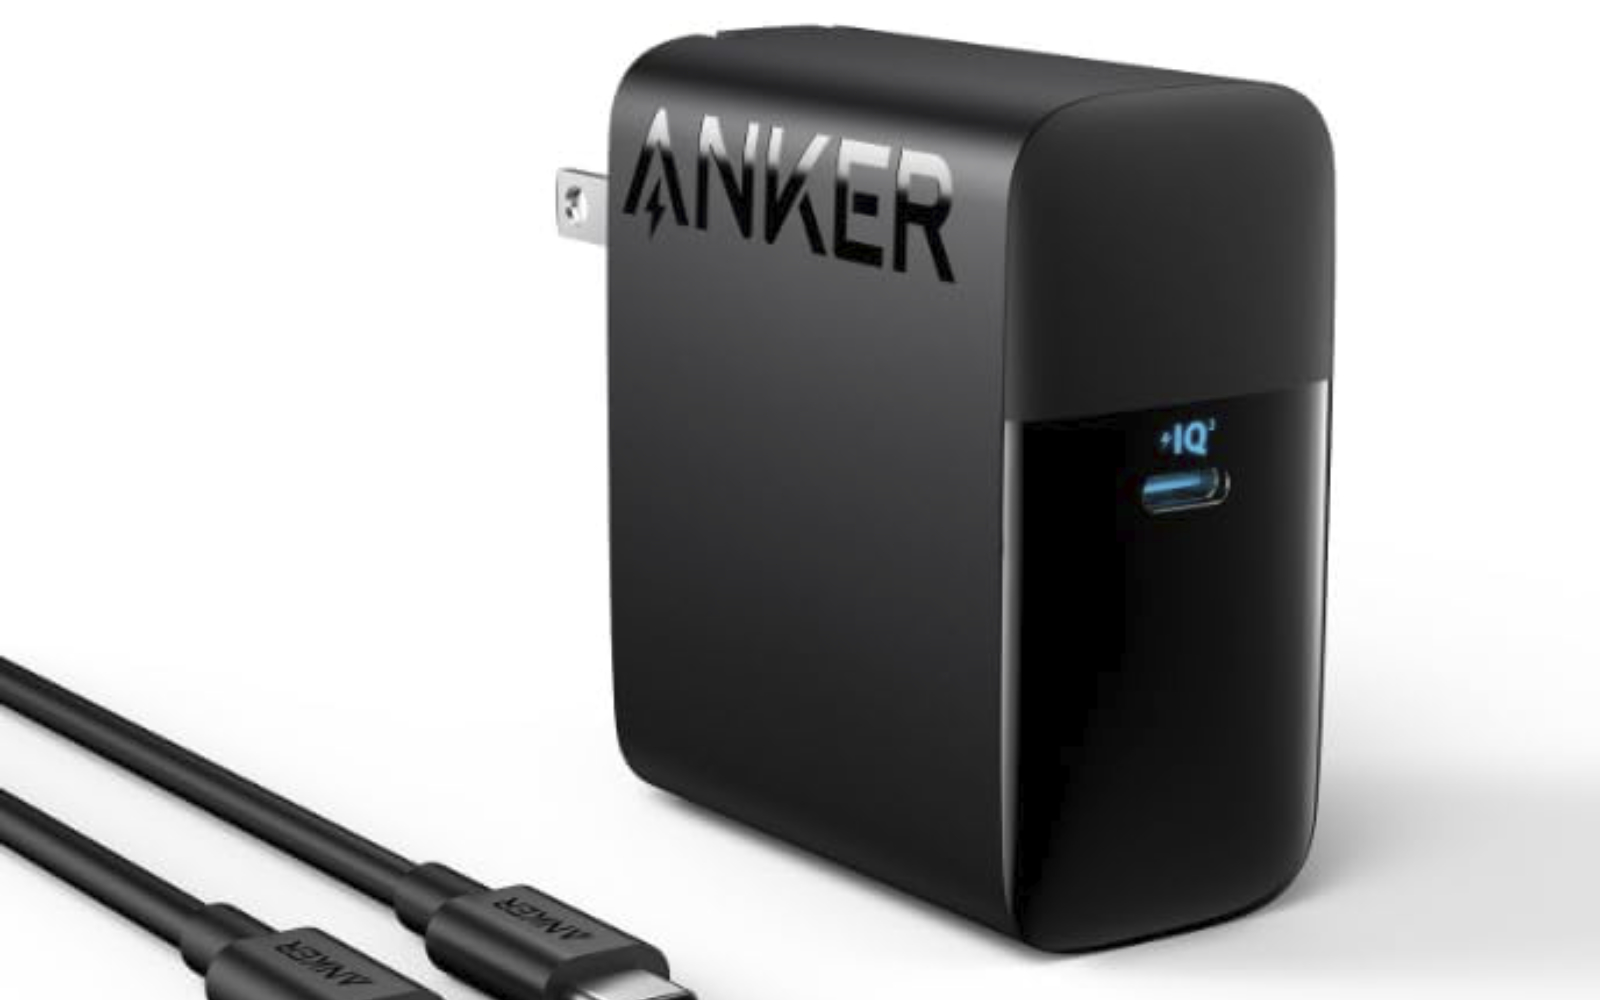 Anker 317 charger